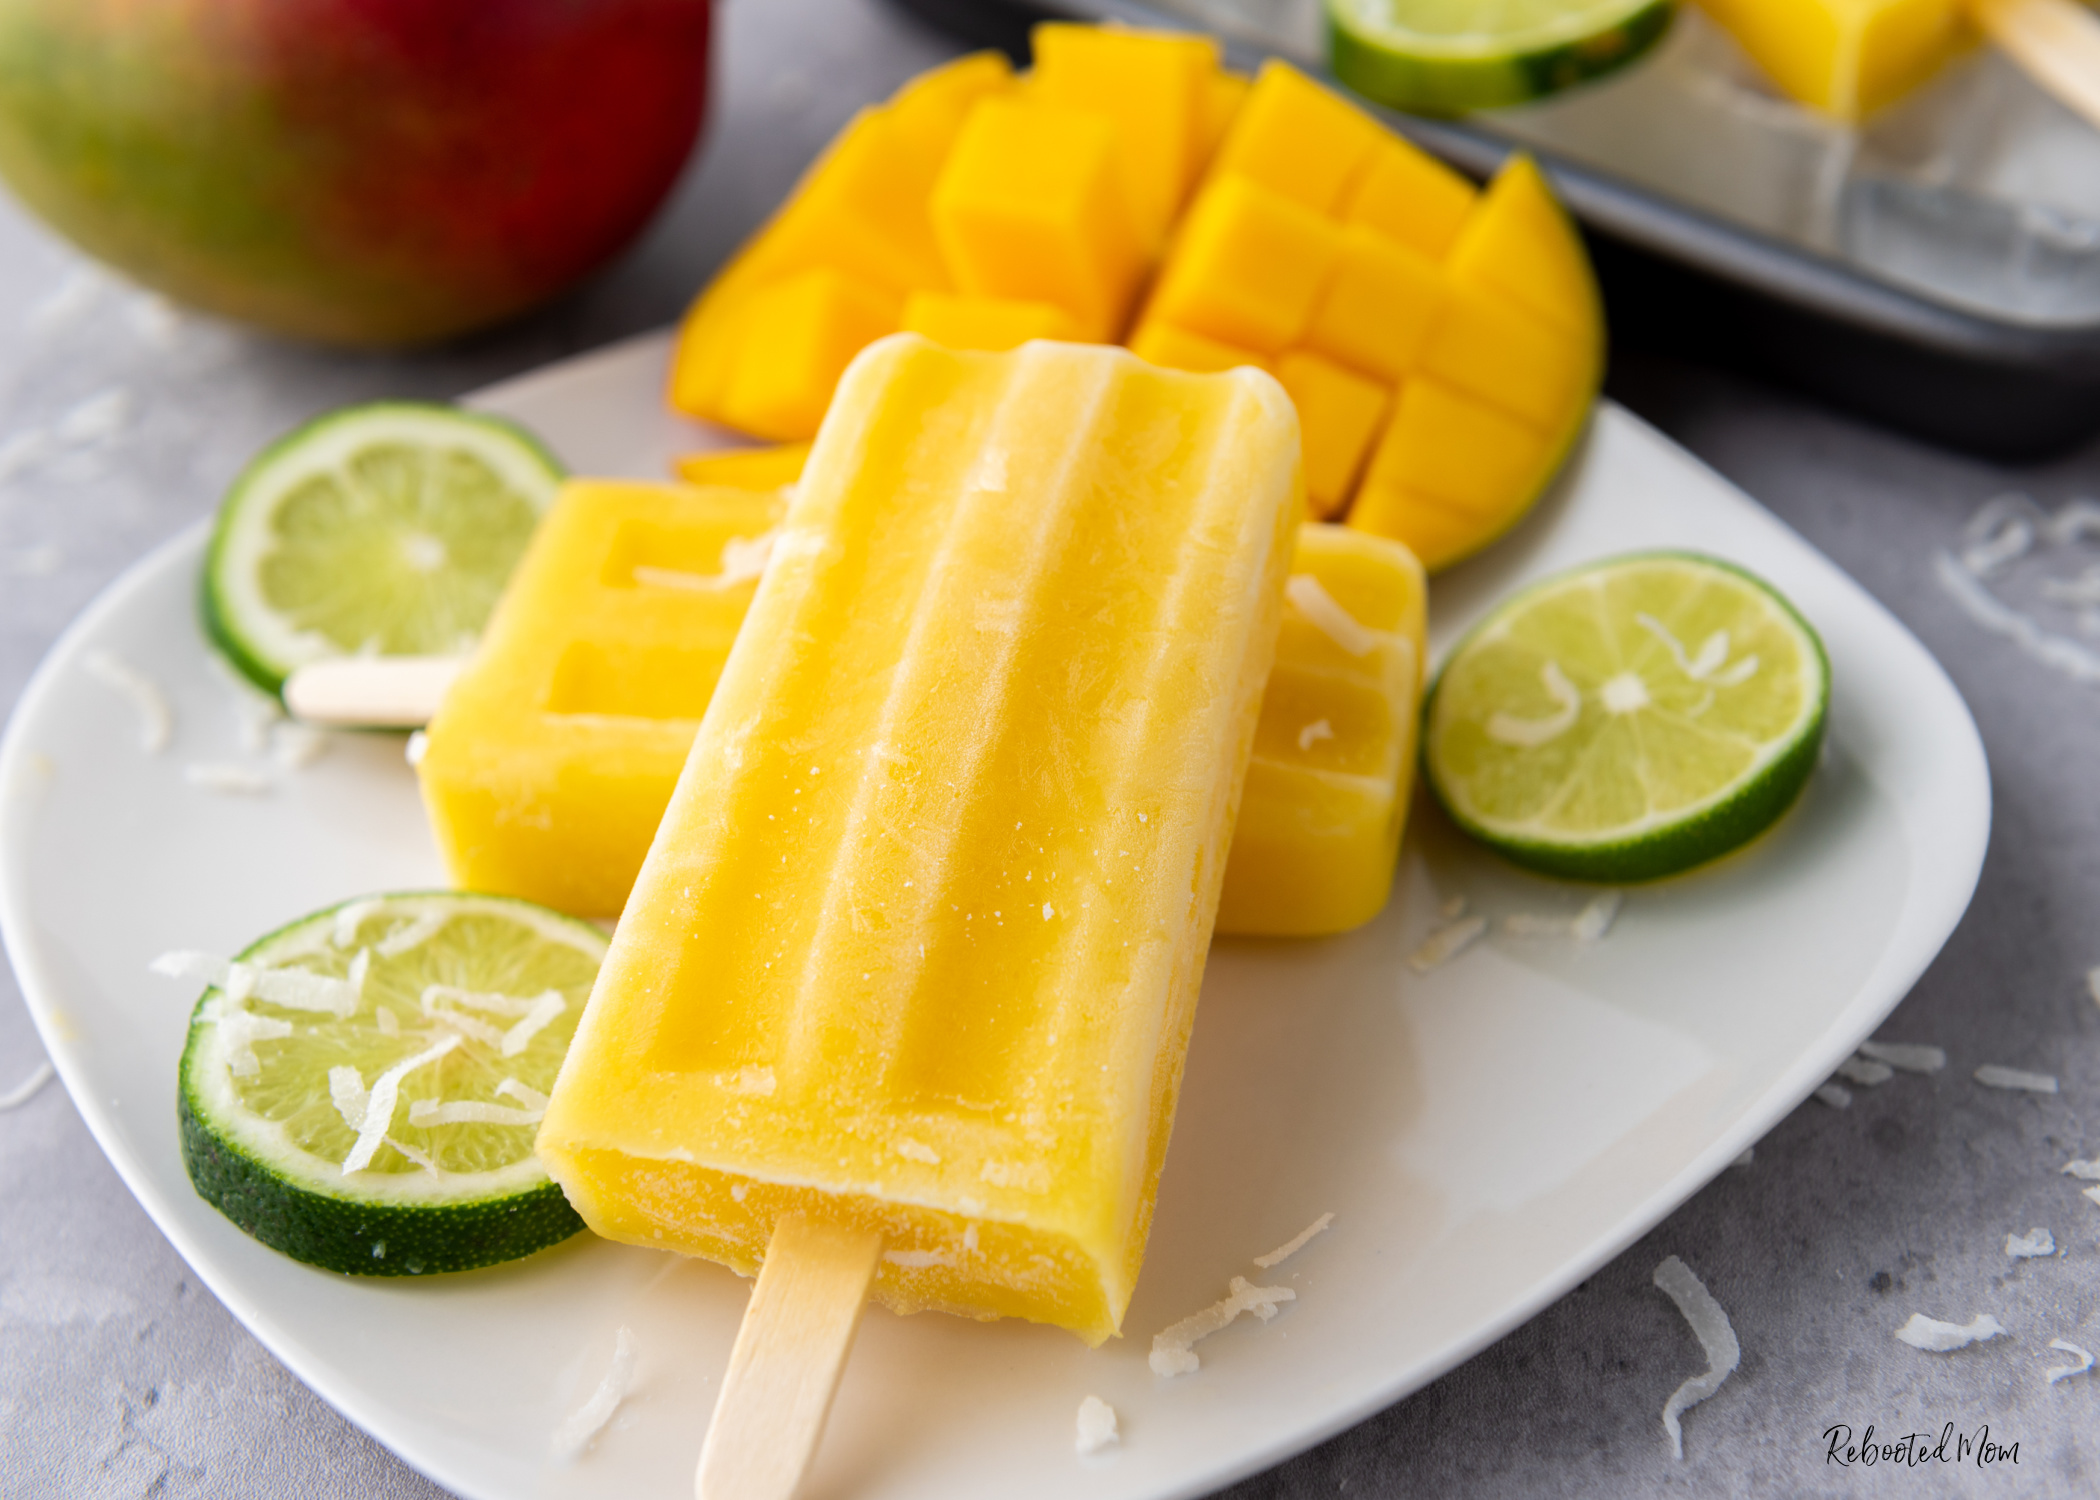 Mango Coconut Lime Popsicles that come together in mere minutes with four simple ingredients to make a treat that's absolutely out of this world delicious!